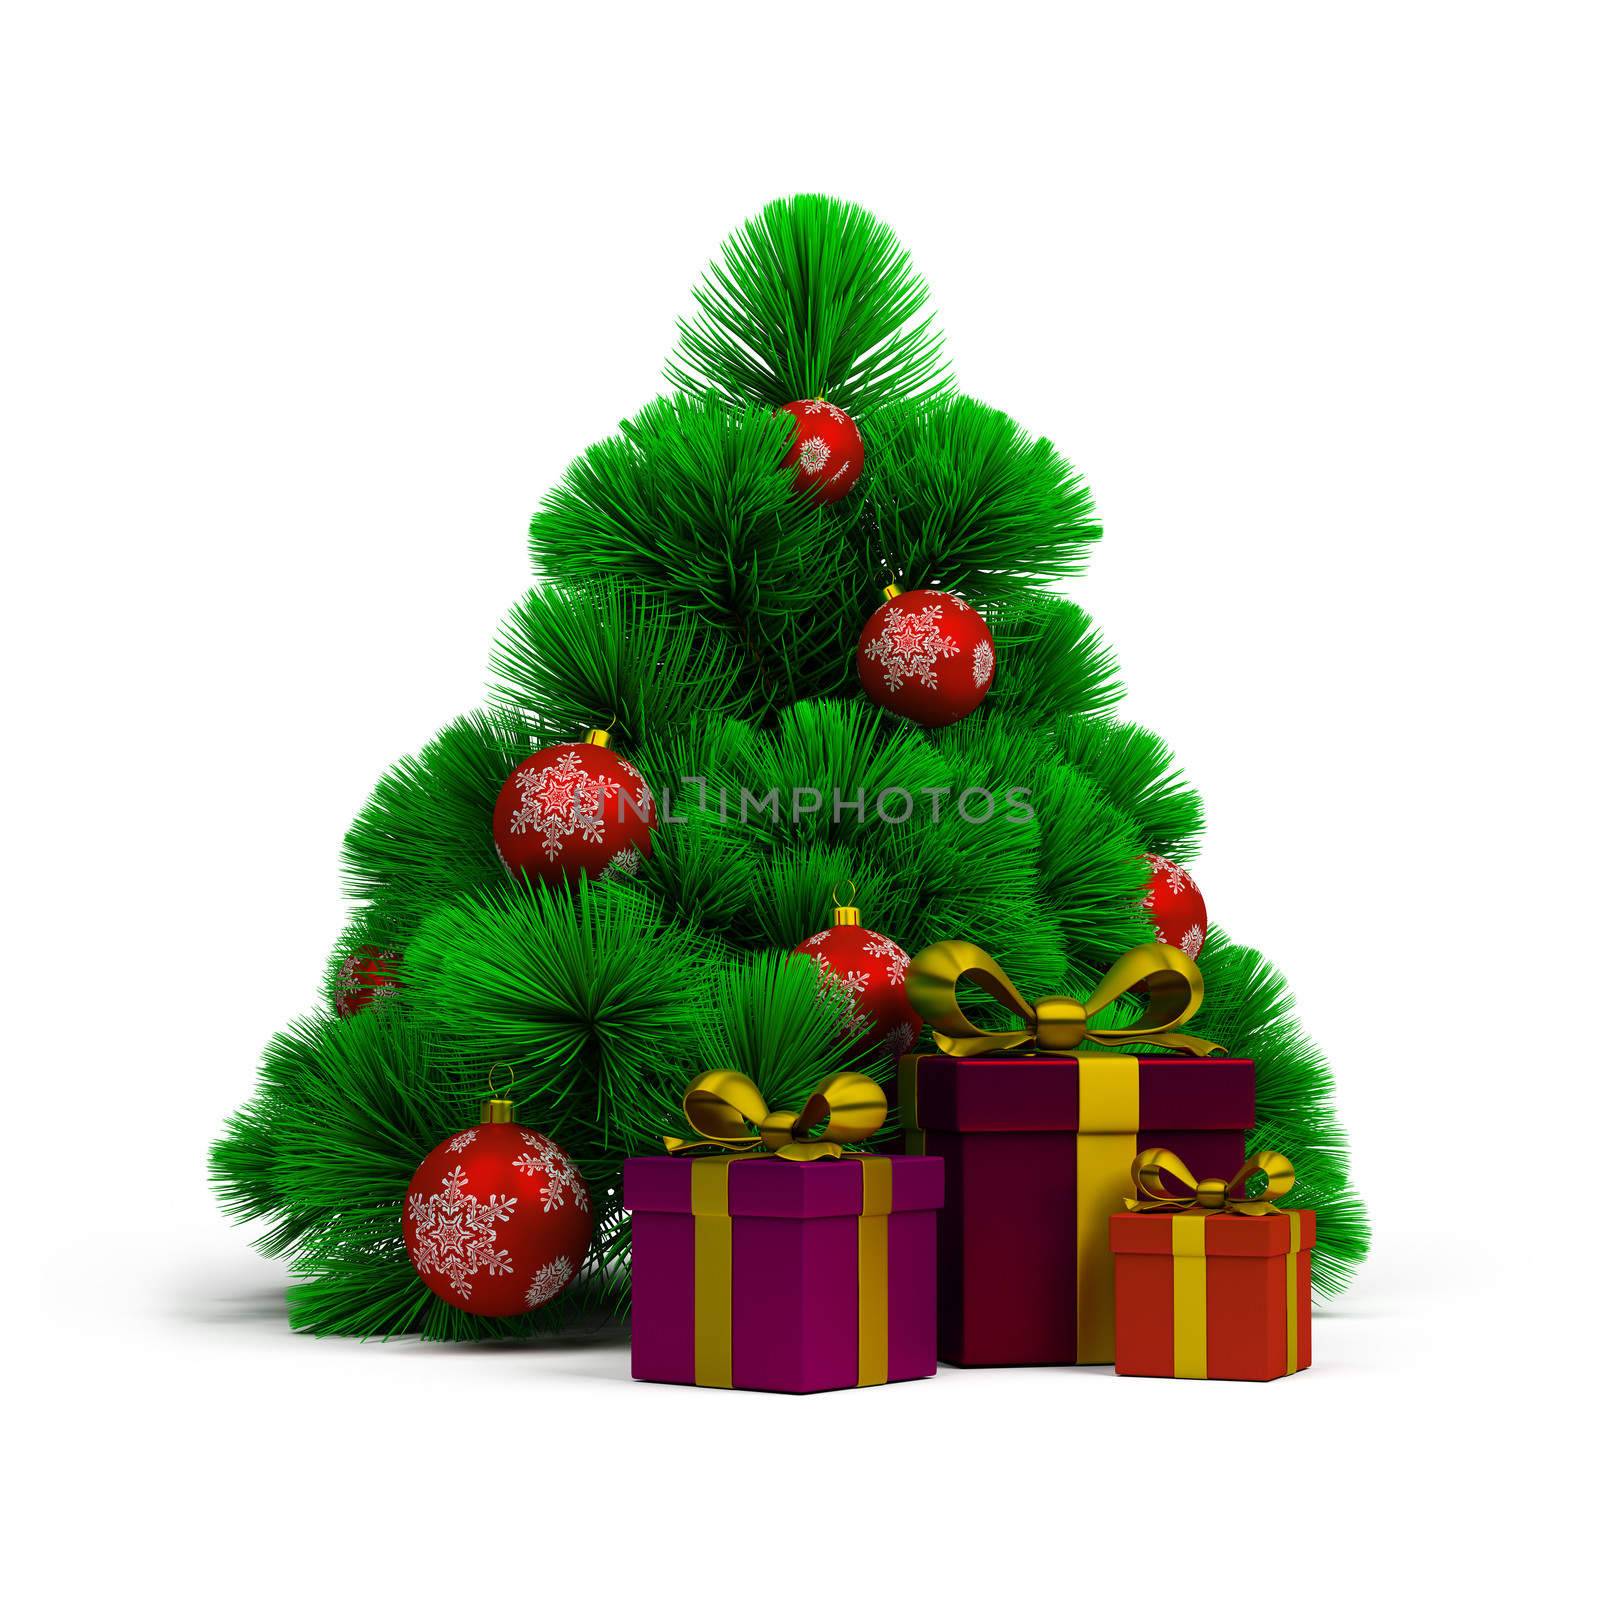 Christmas tree, balls and gifts. 3d image. Isolated white background.